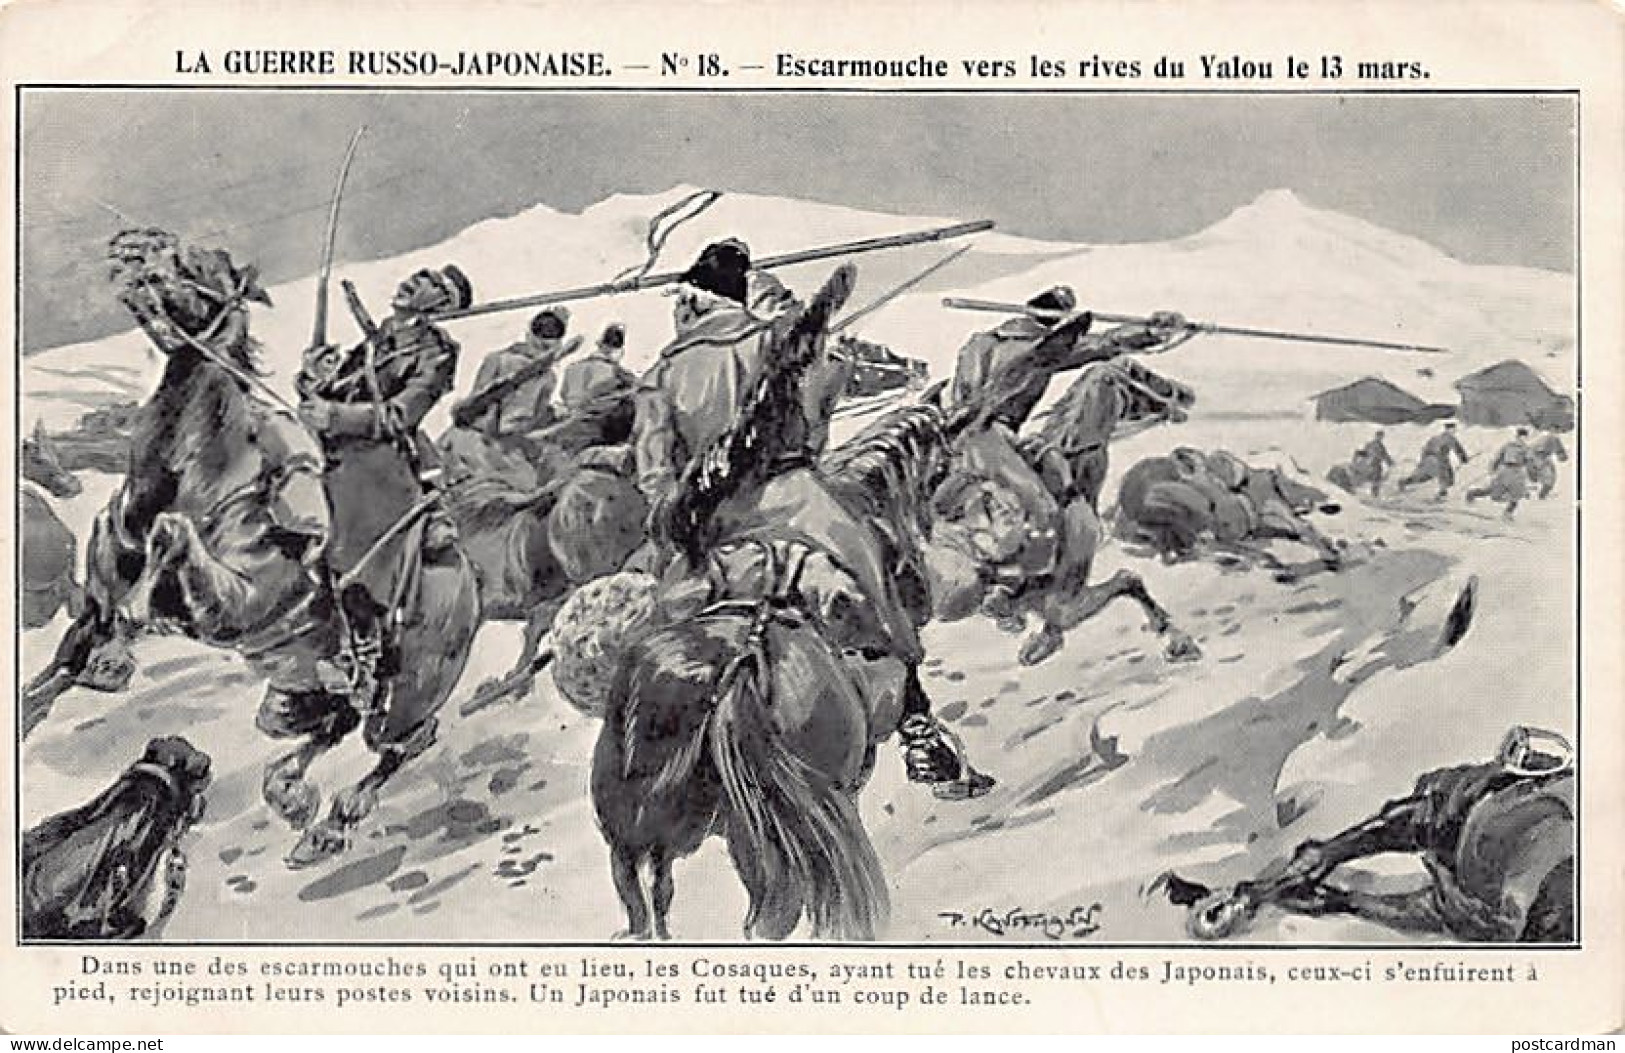 Korea - RUSSO JAPANESE WAR - Skirmishes Near The Banks Of The Yalu River On March 13, 1904 - Korea (Noord)